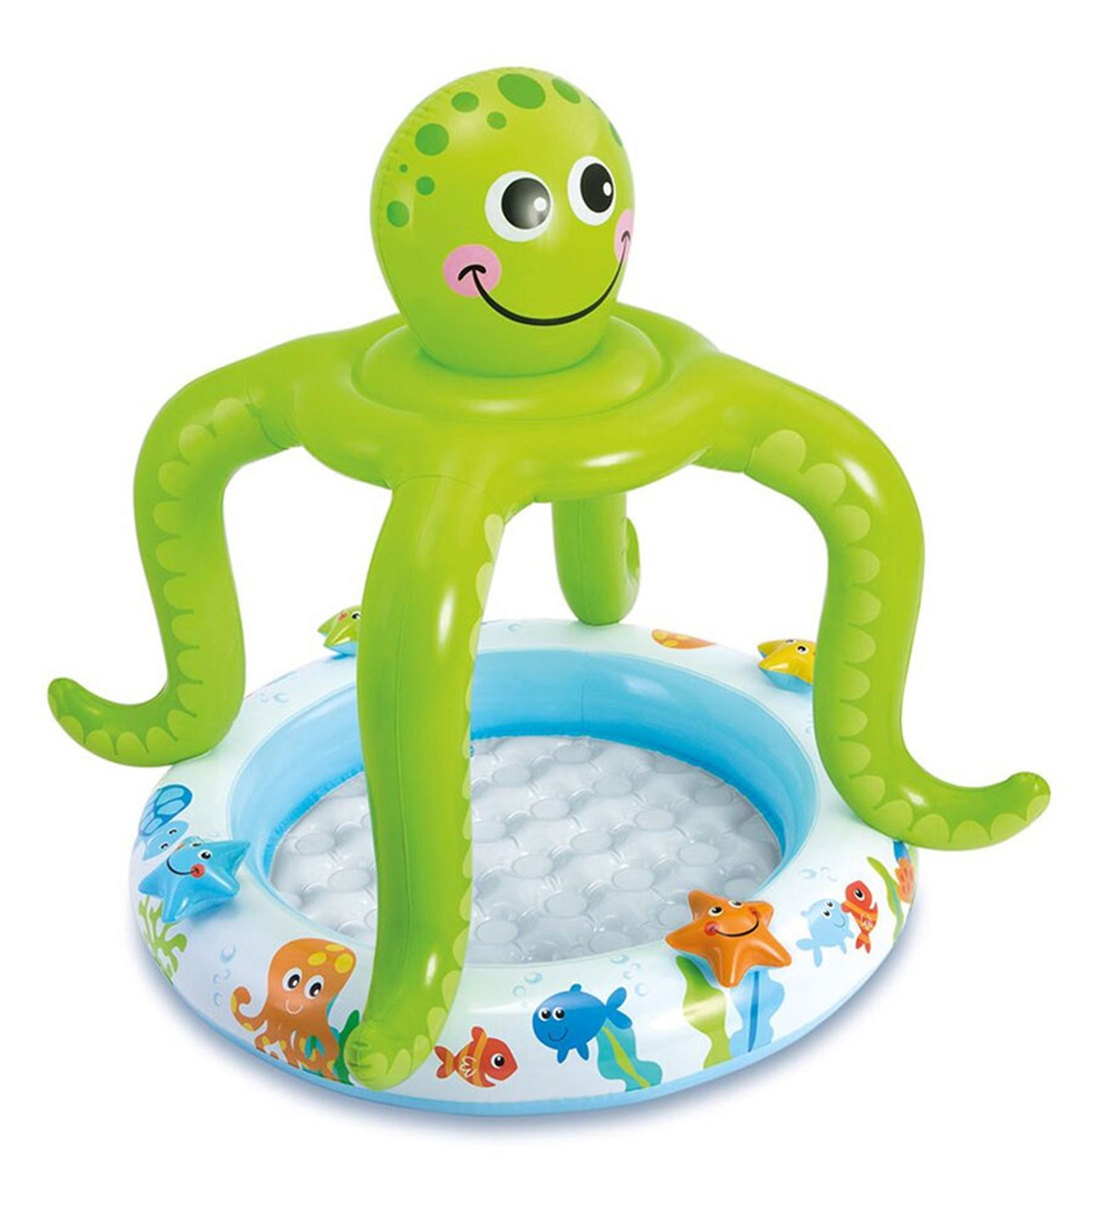 Octopus Inflatable Pool in Green Colour